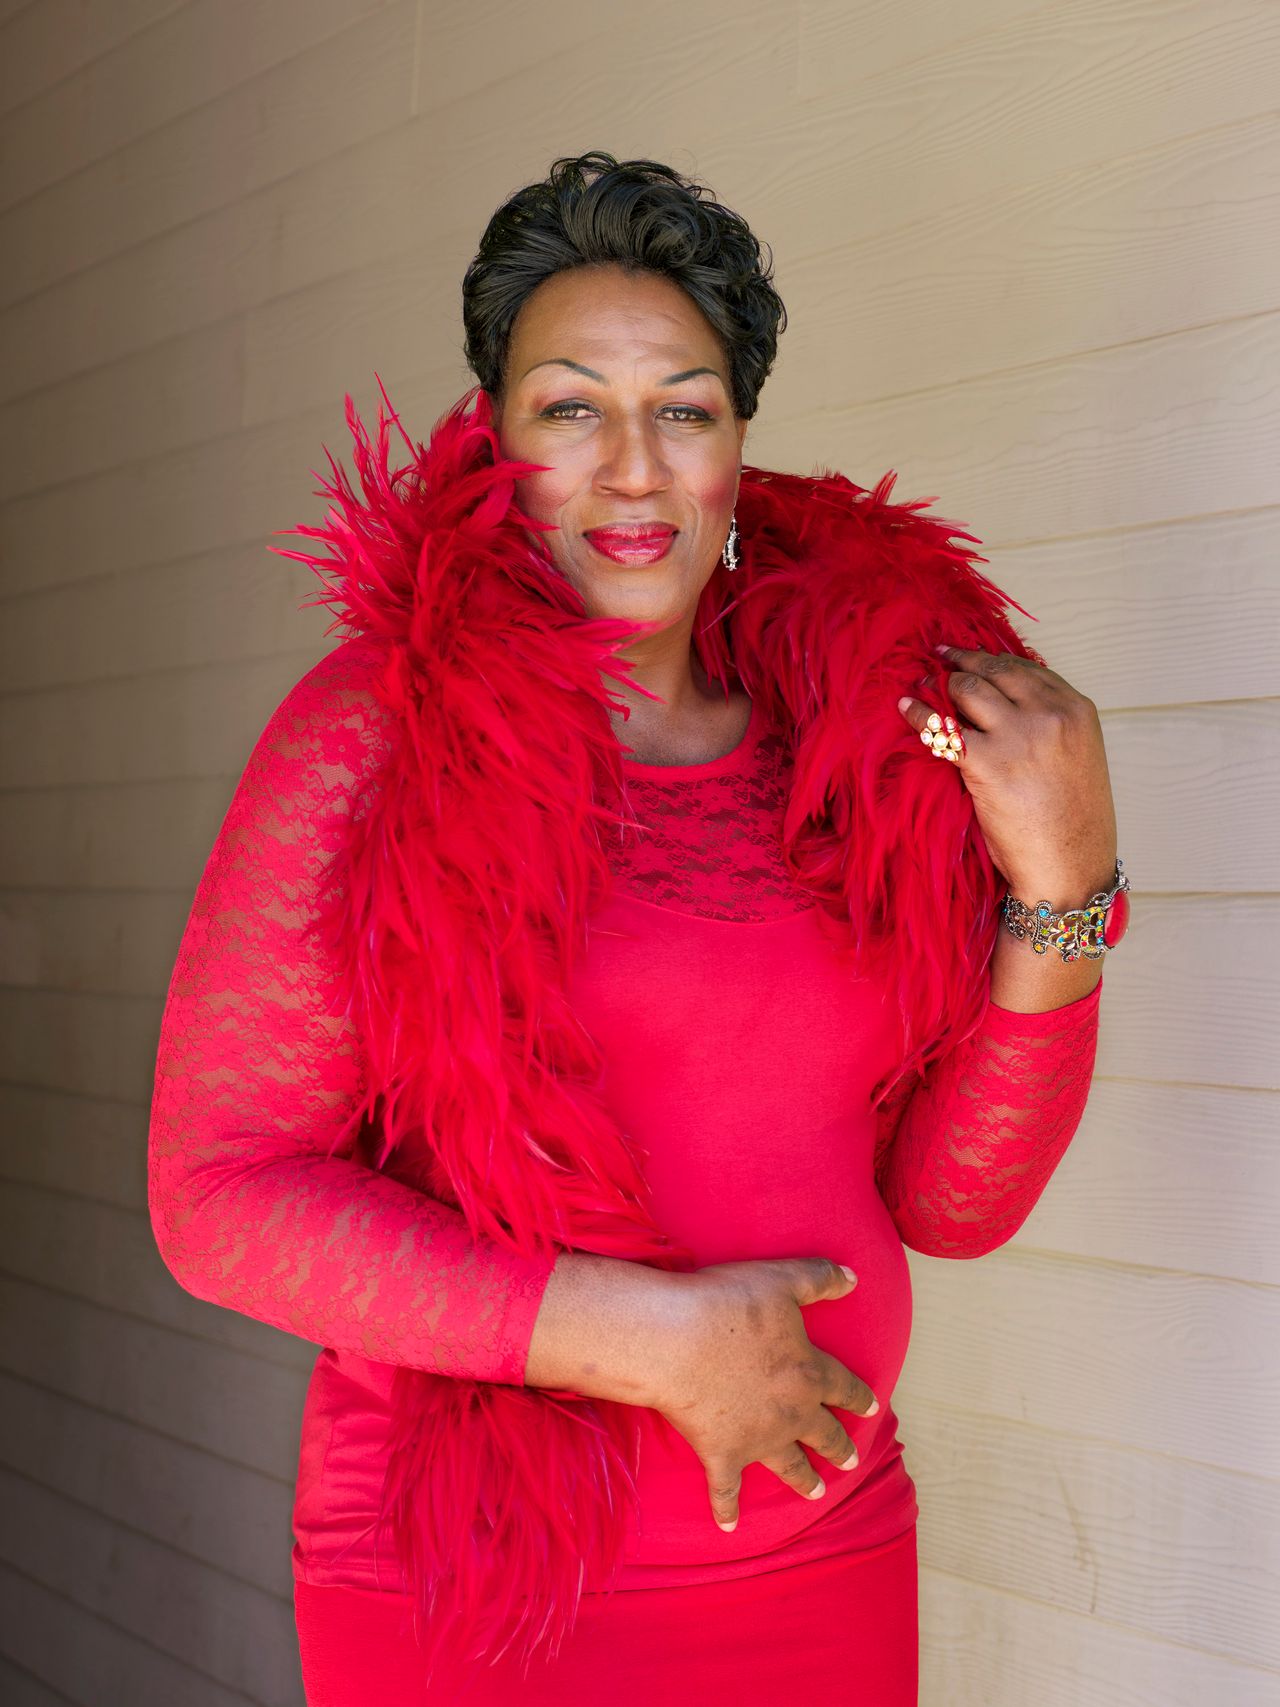 Dee Dee Ngozi, 55, Atlanta“This coming into my real, real fullness of knowing why I was different is because I was expressing my spirit to this world. And I didn’t know how God felt about it, but I believe in God, and I have a deep spiritual background, and I talk with the Holy Spirit constantly, who’s taken me from the Lower West Side doing sex work to being at the White House.”